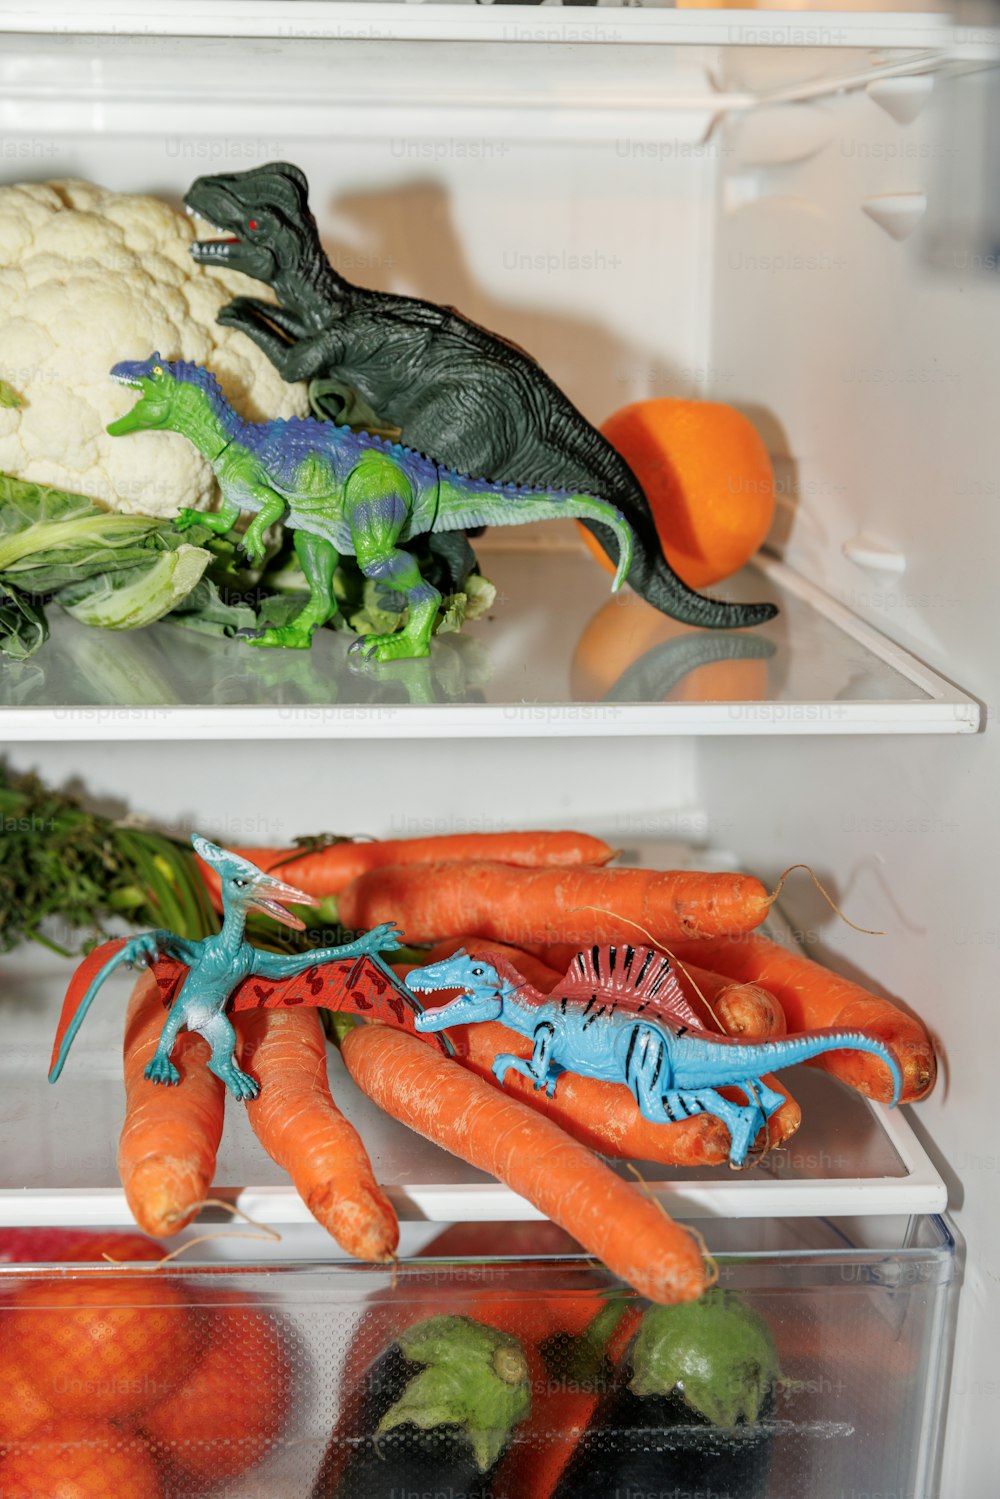 a parrot on a shelf with carrots and broccoli